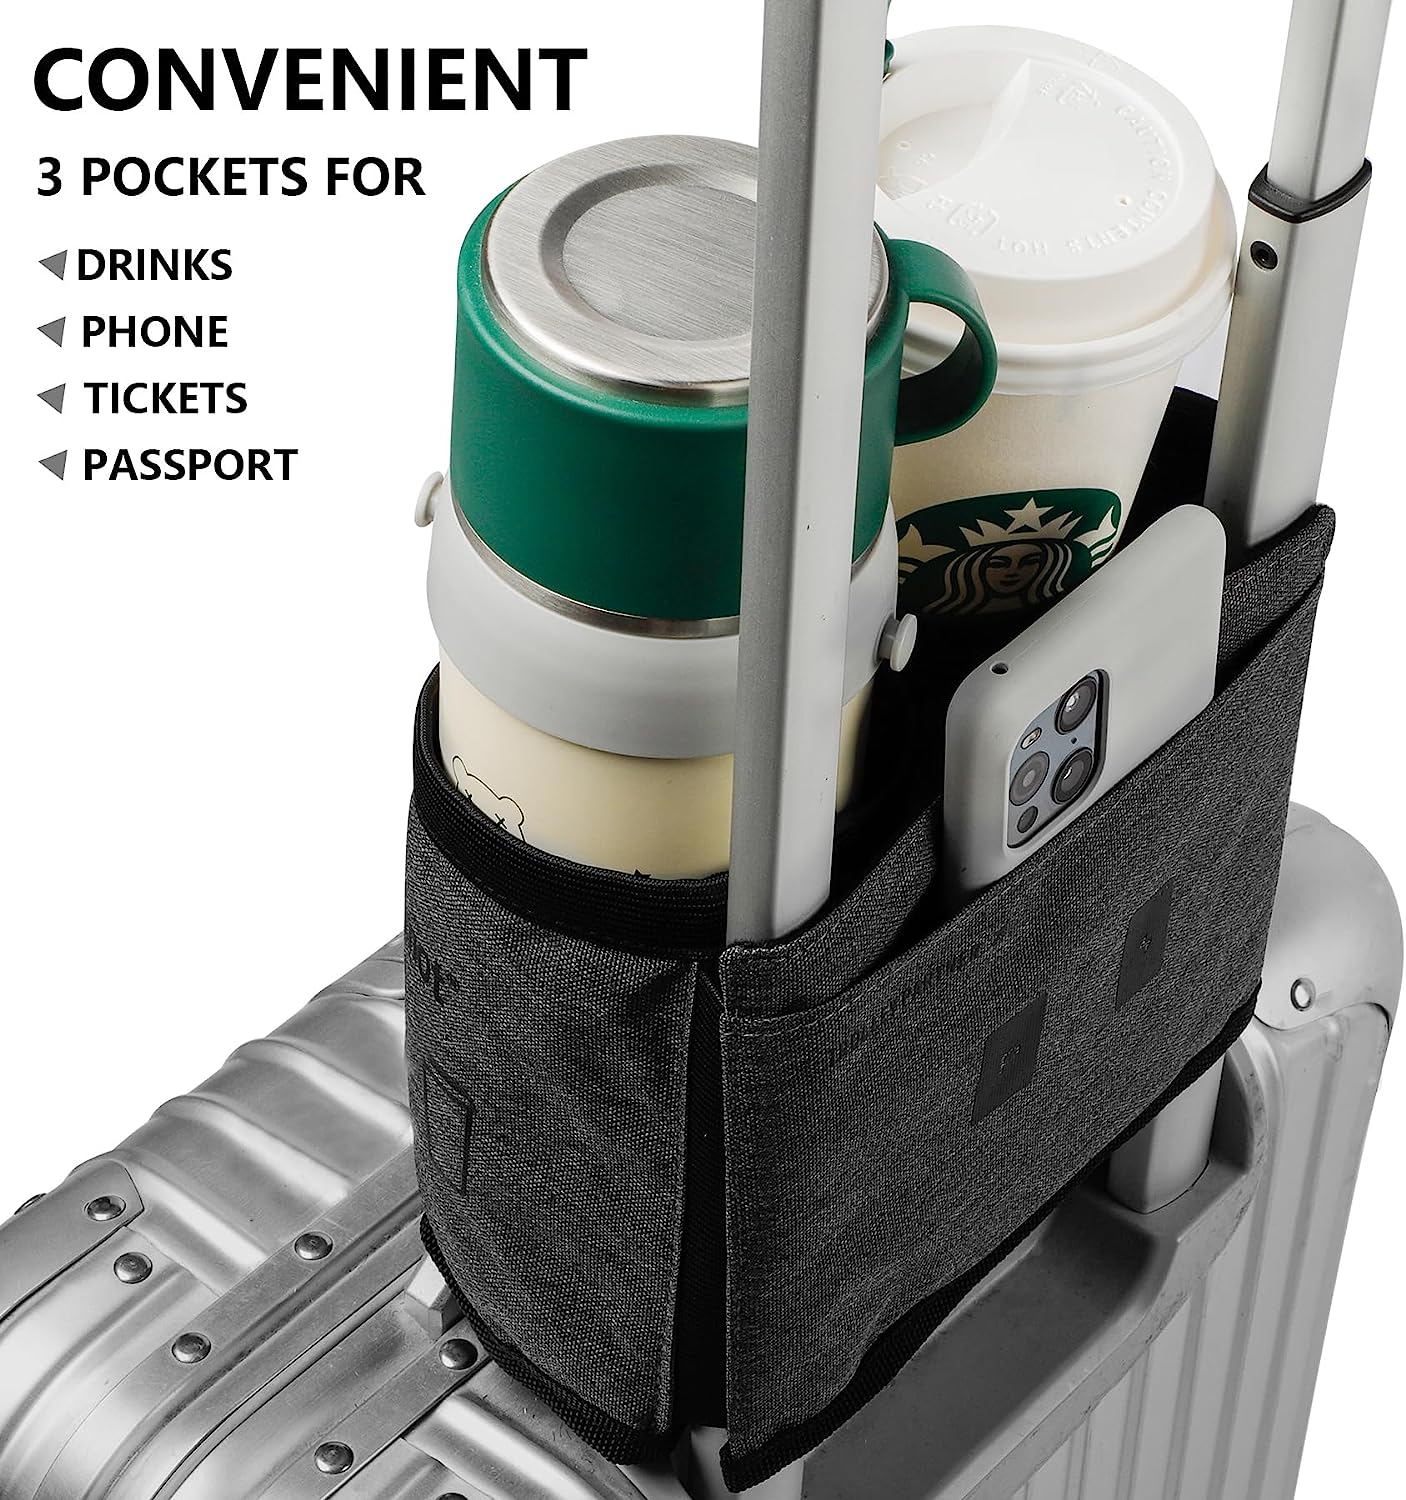 riemot Luggage Travel Cup Holder Free Hand Drink Caddy - Hold Two Coffee Mugs - Fits Roll on Suitcase Handles